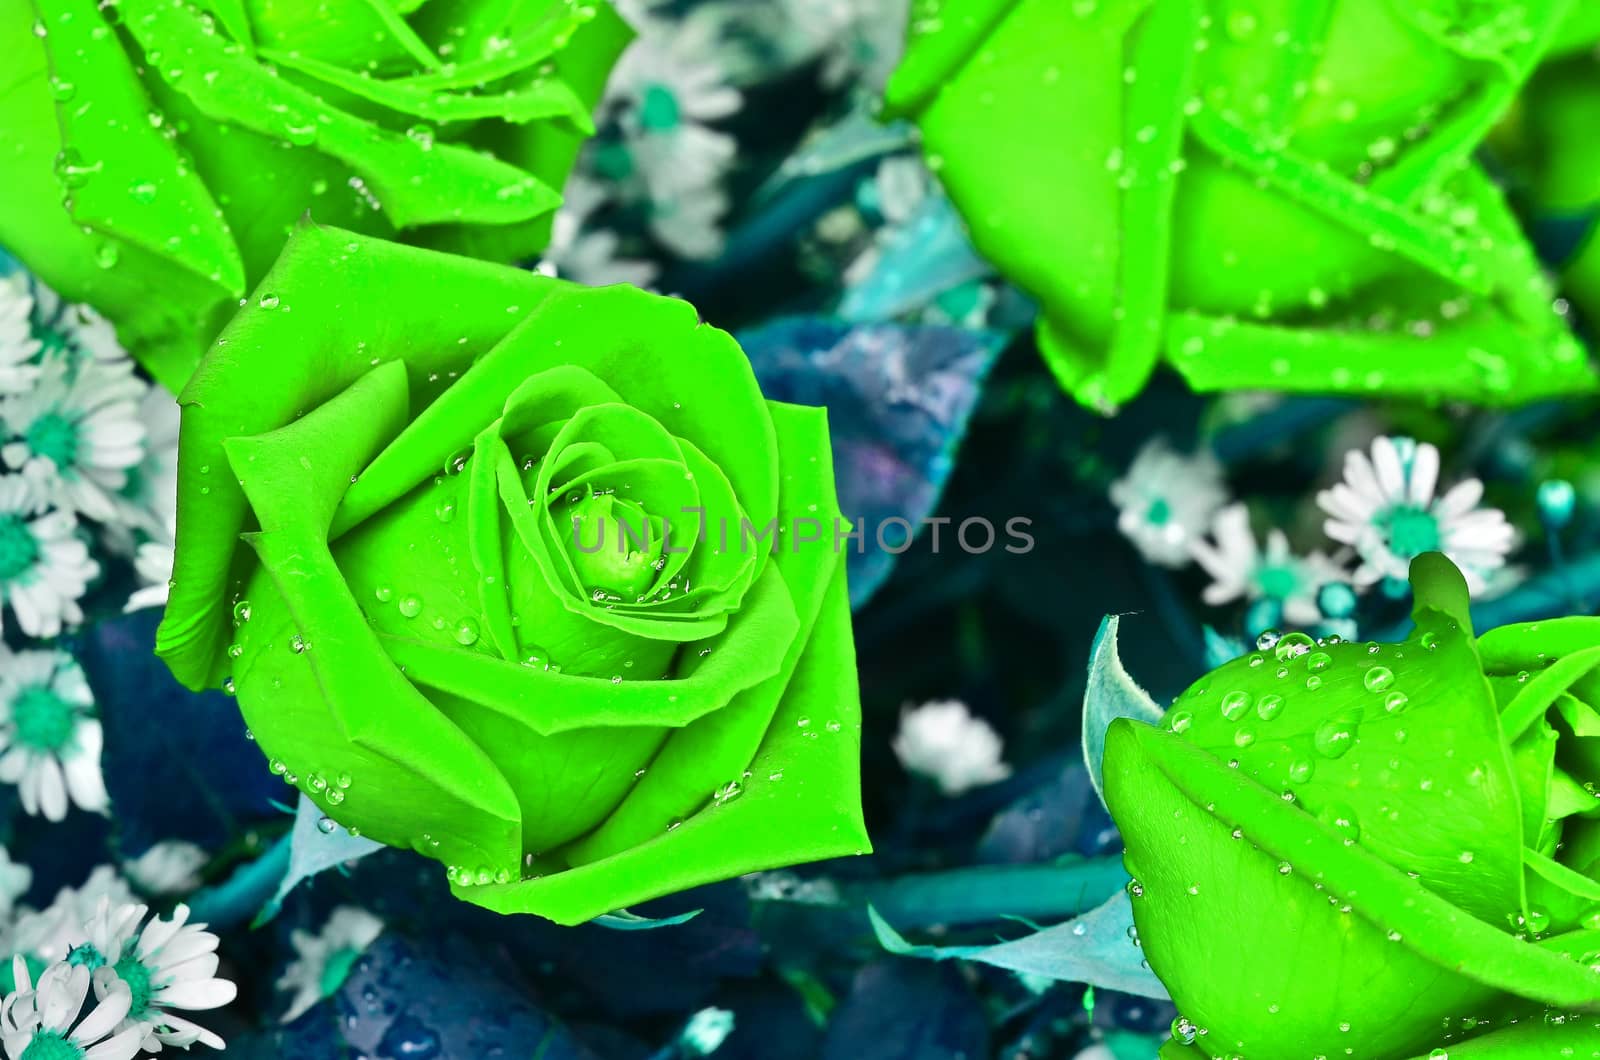 Close-up view of beatiful dark green rose by raweenuttapong